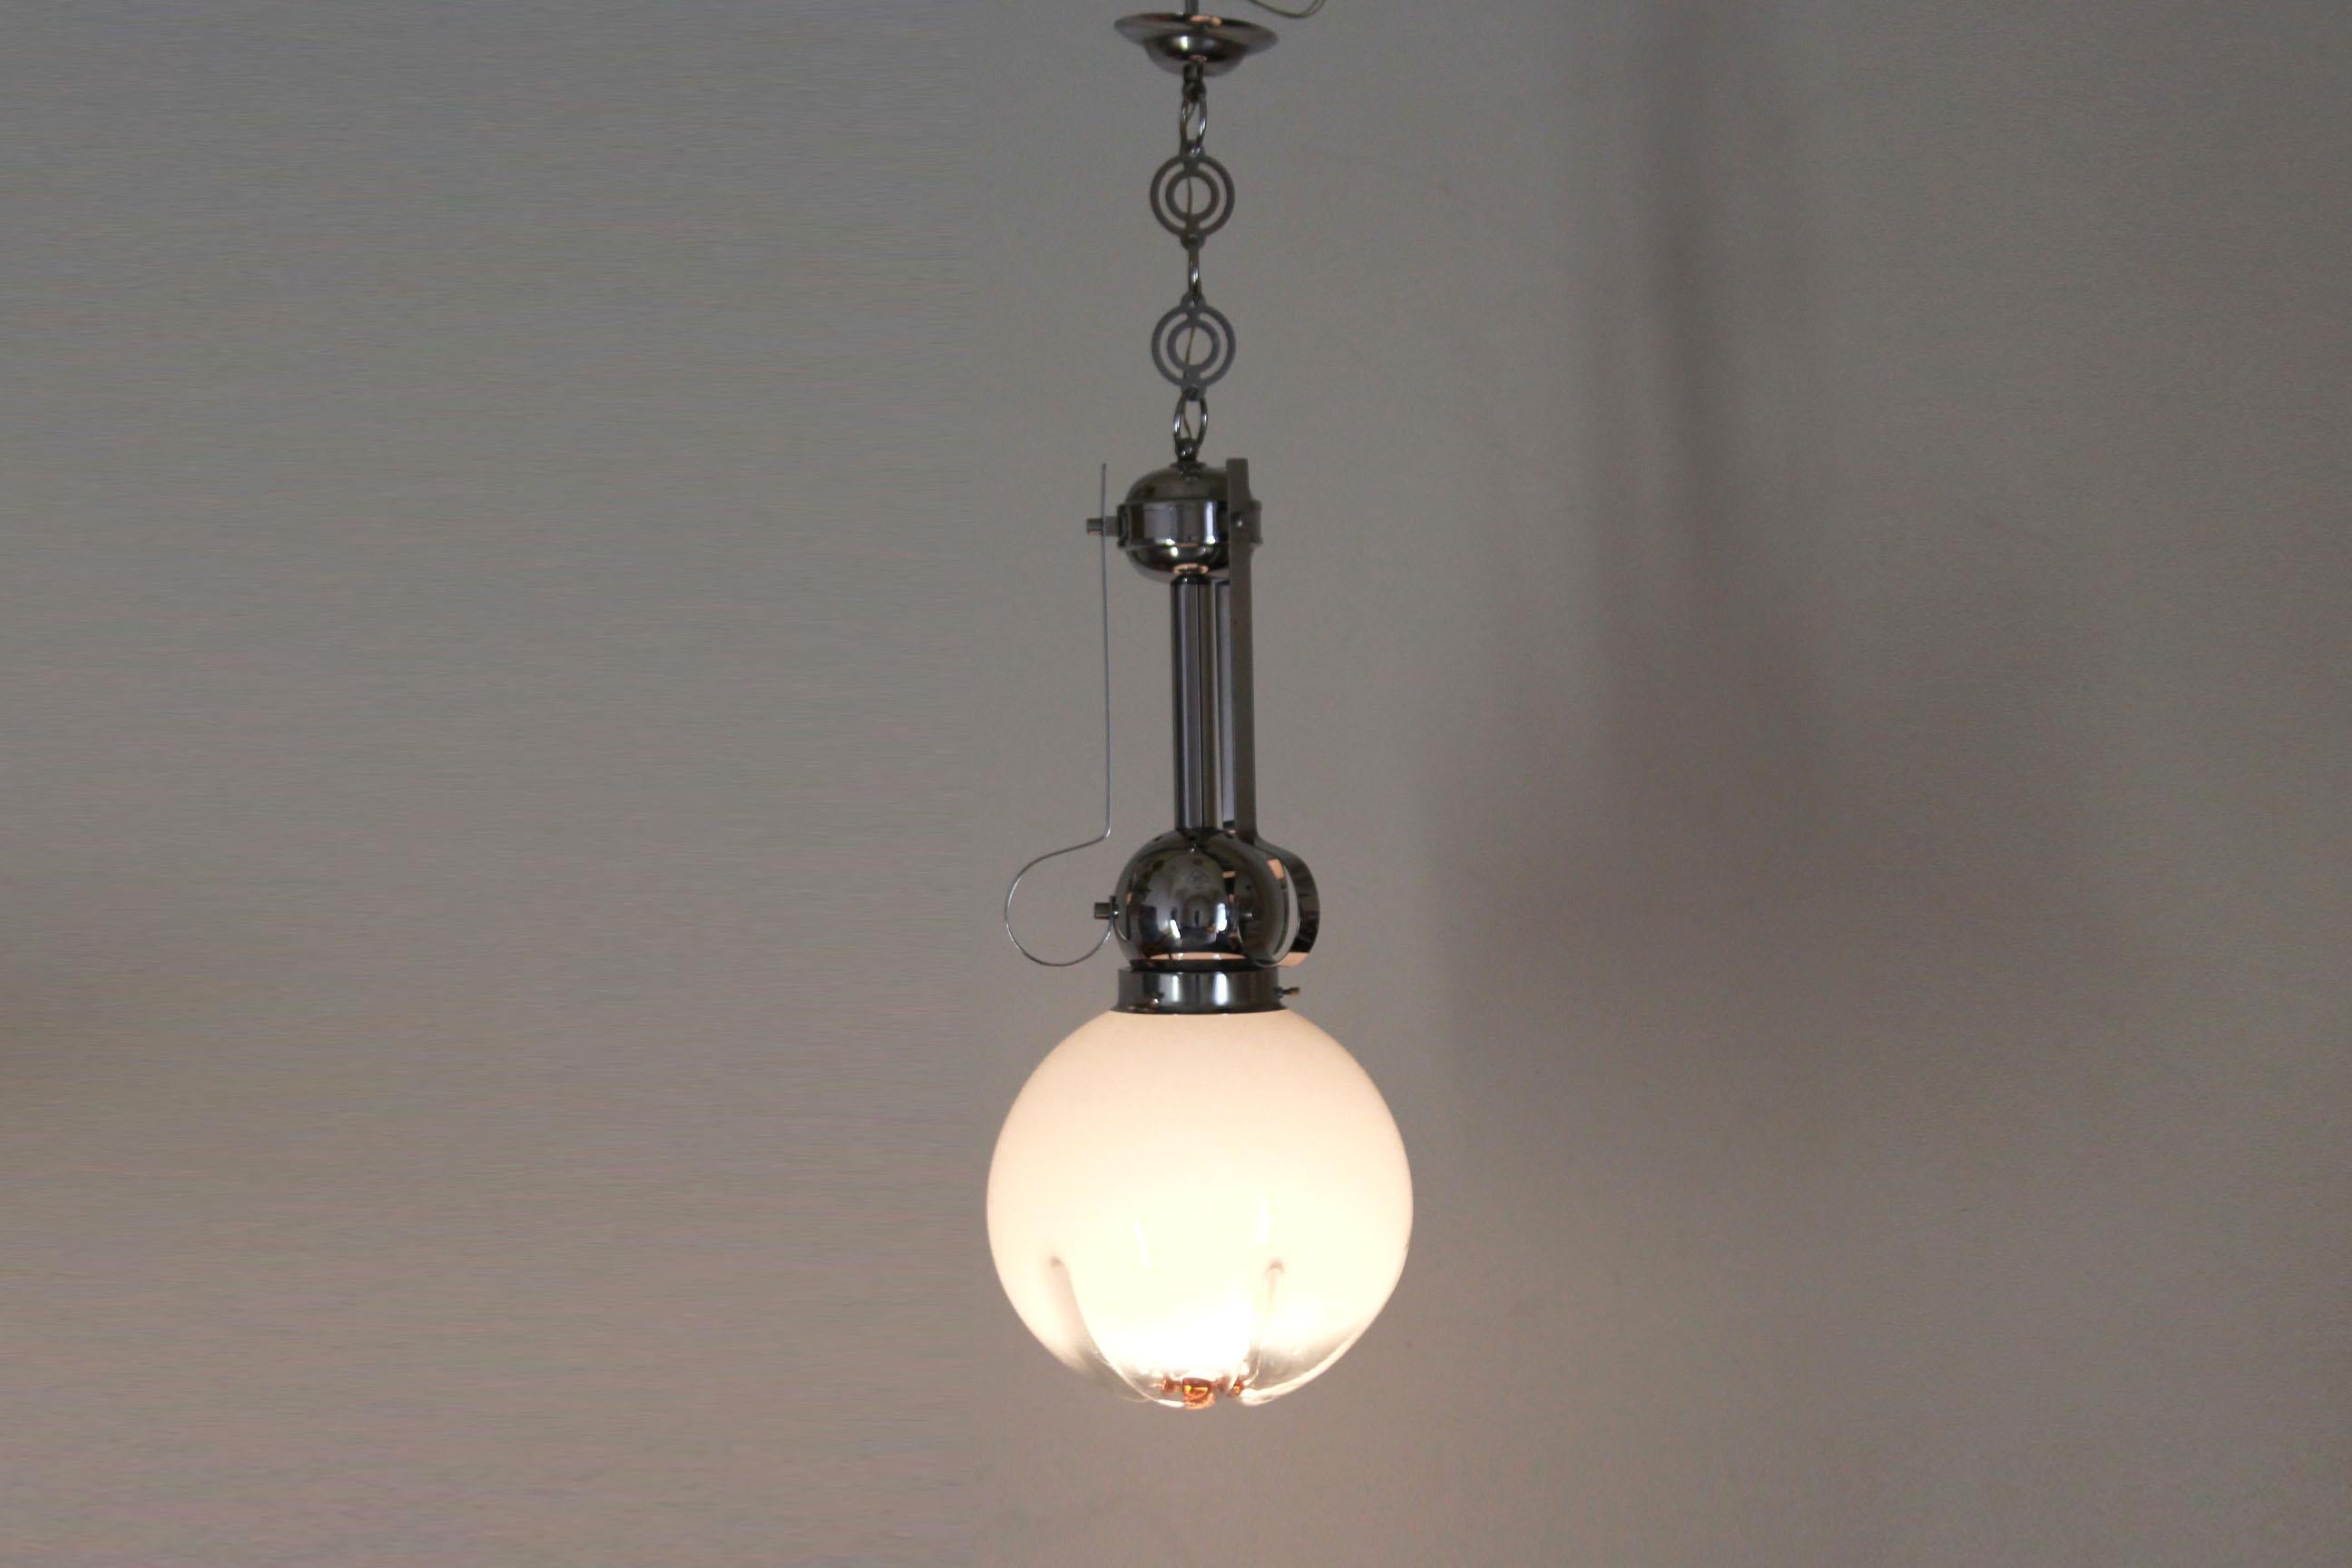 Vintage Murano Pendant, Mazzega Italy 1970s
A 1970s vintage pendant designed by Mazzega ltd. Murano glass light globe and chromed structure. In really good conditons with only few signs of time.

E27 light.